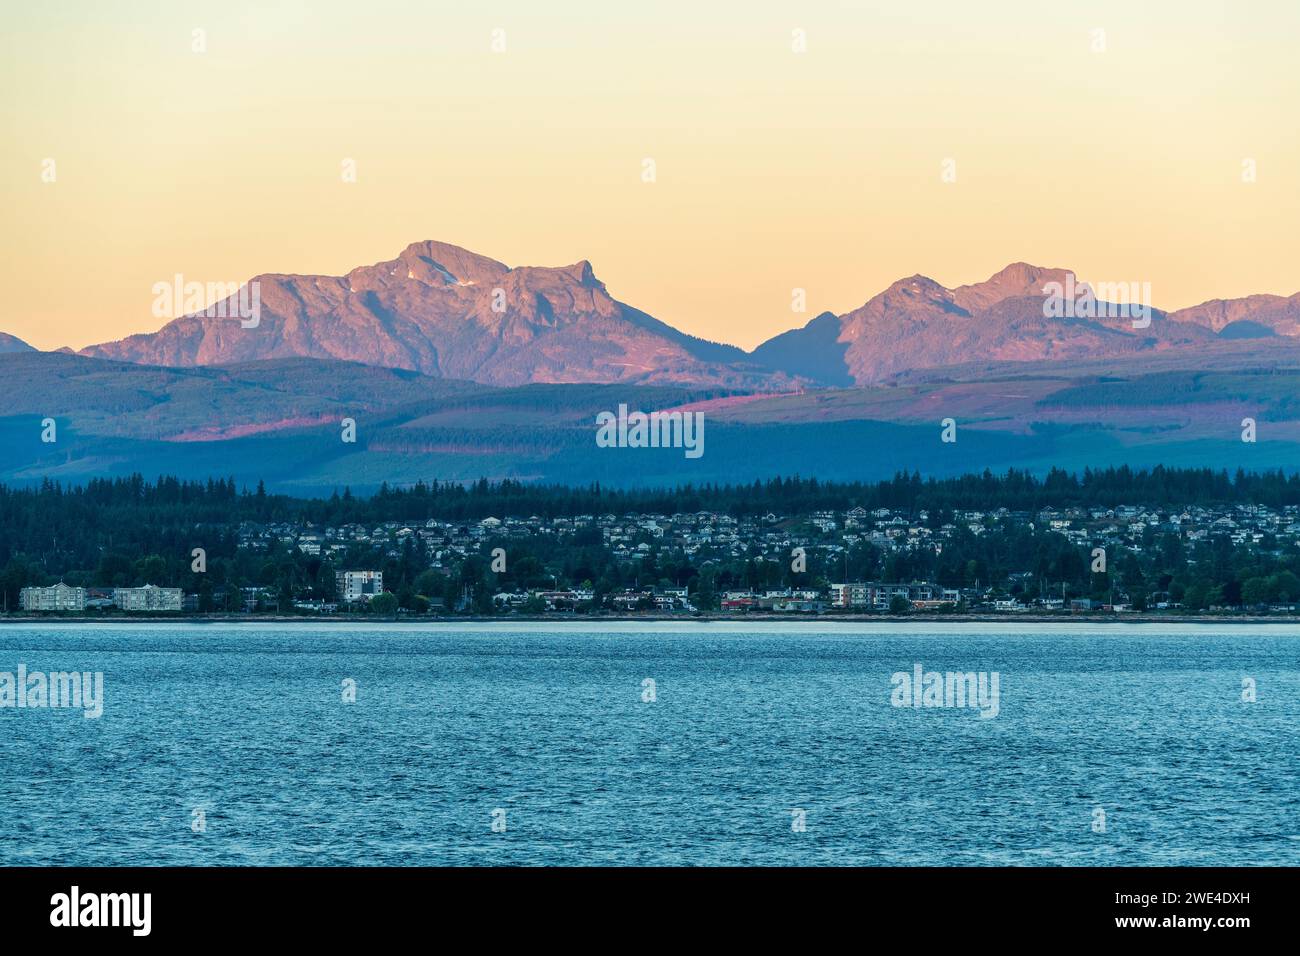 Campbell River at sunrise seen from Quadra Island, Vancouver Island, British Columbia, Canada. Stock Photo